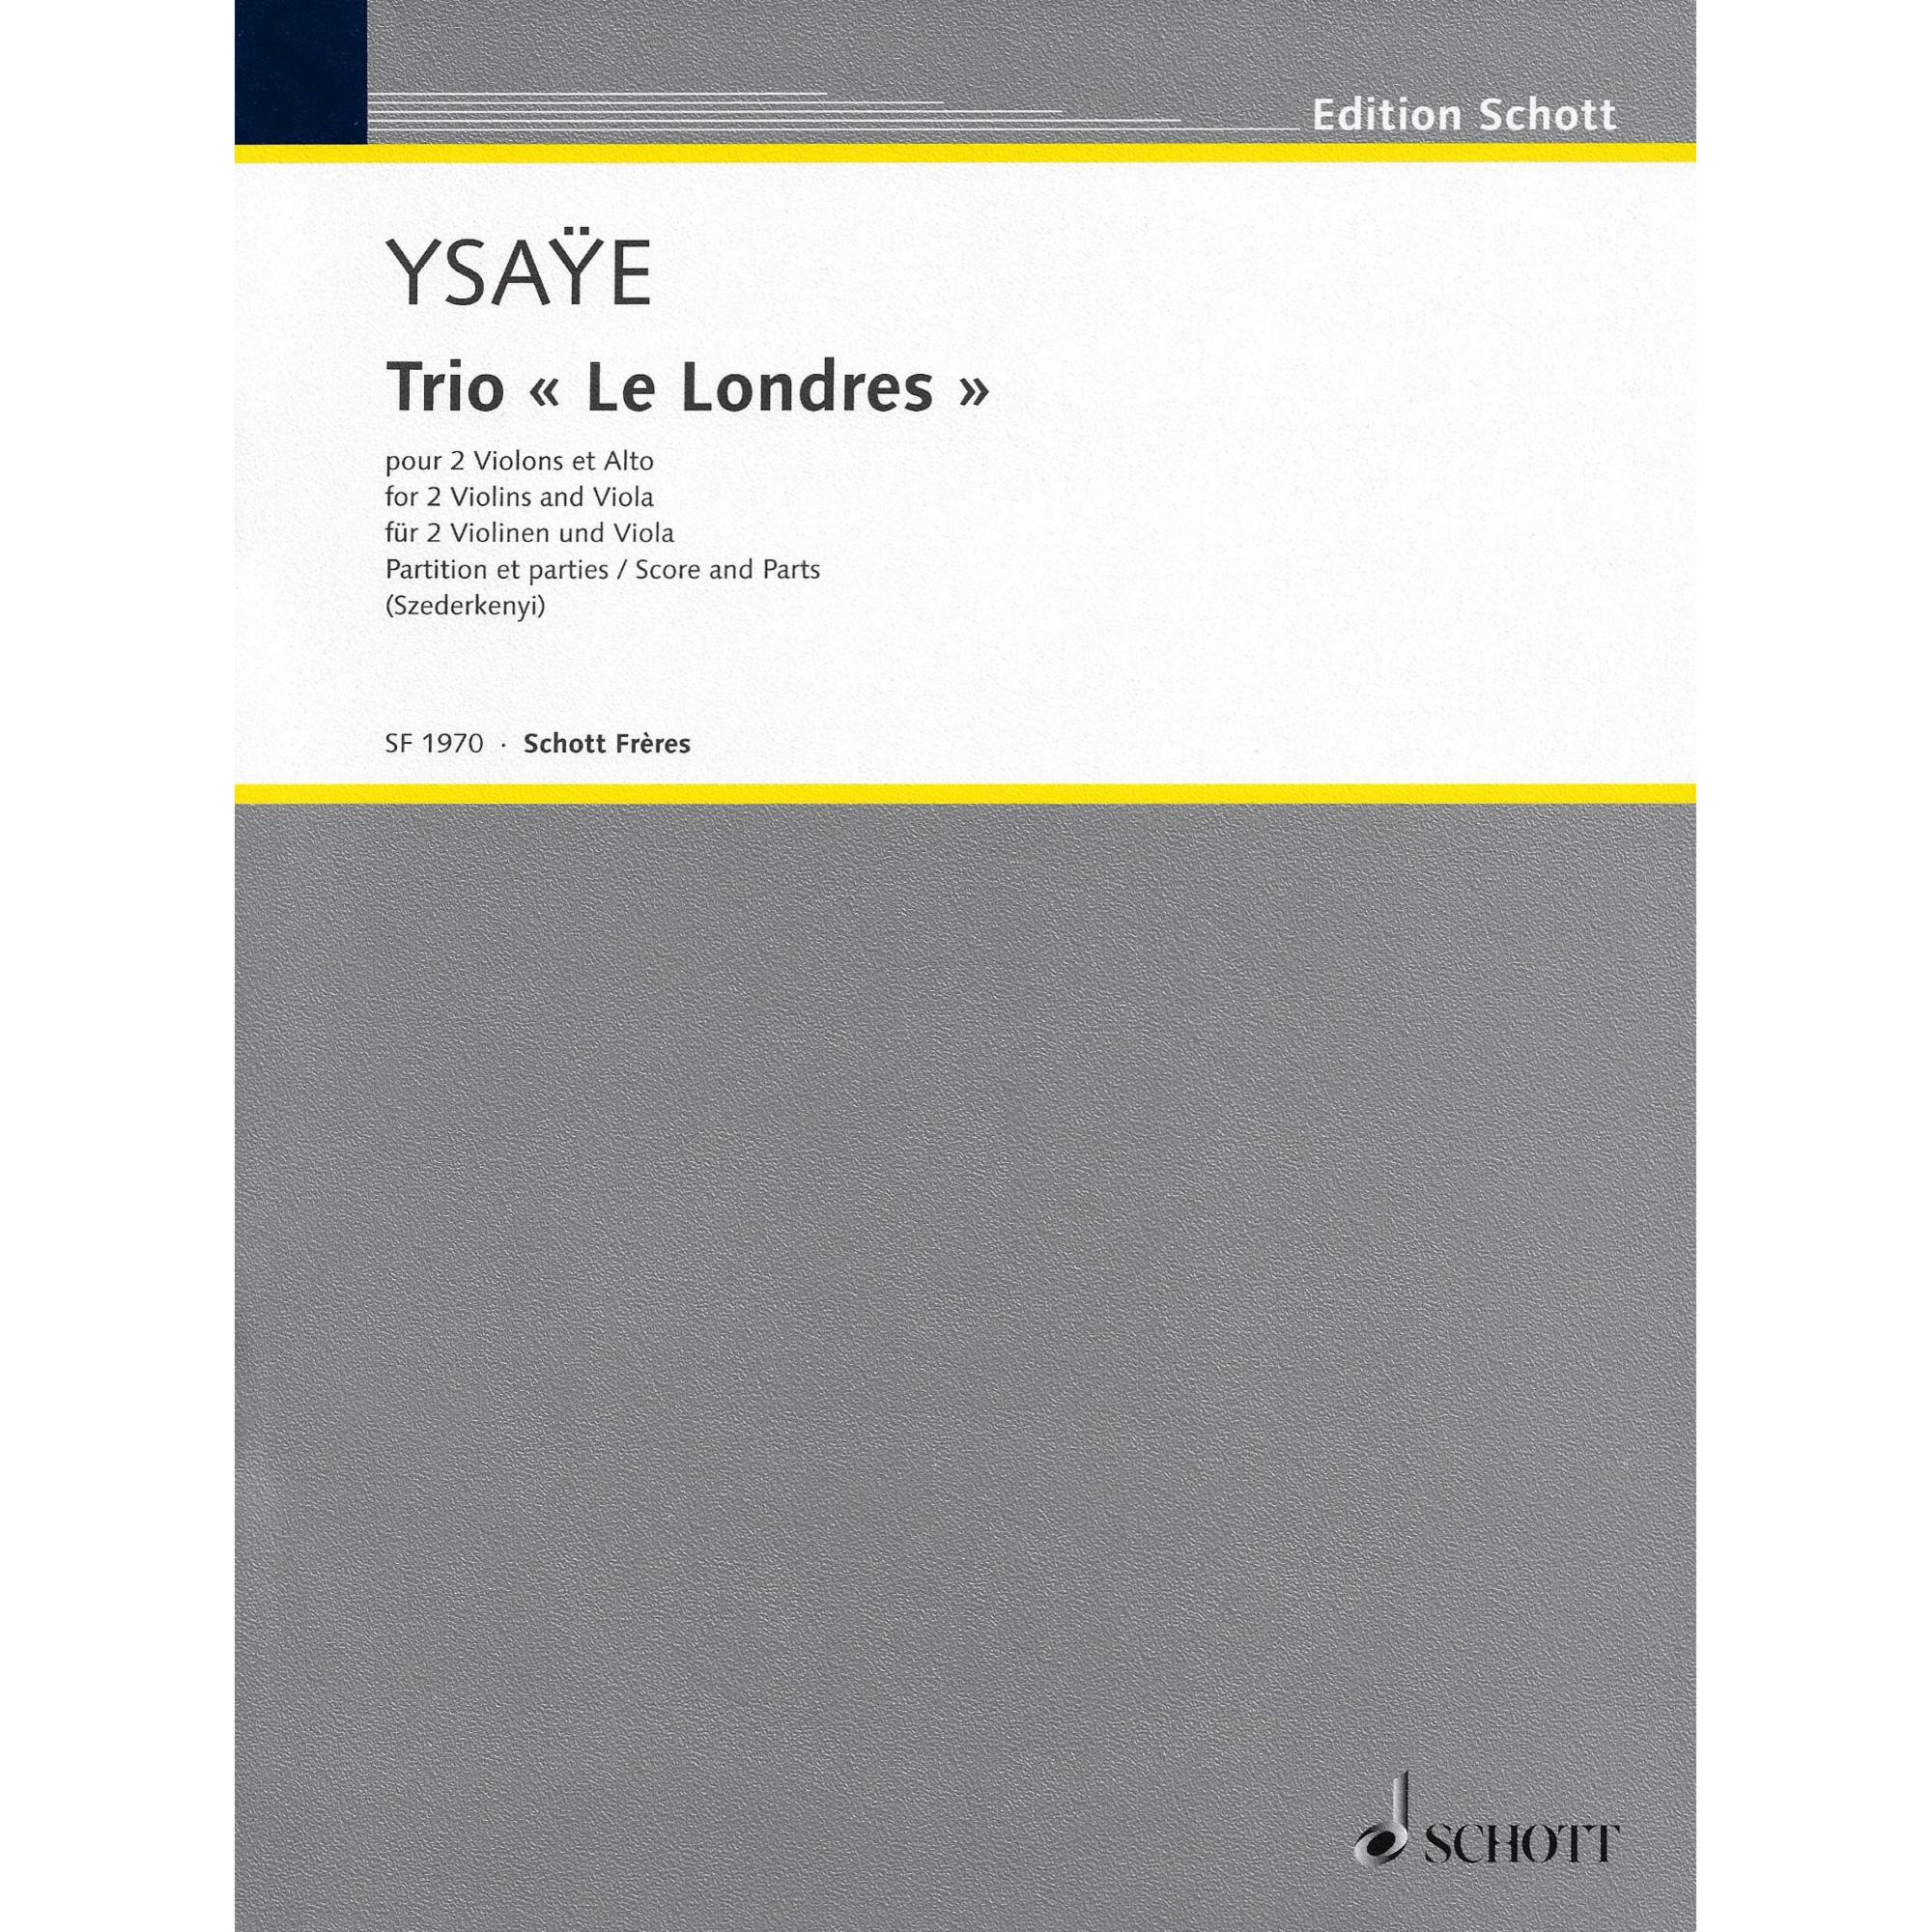 Ysaye -- Trio (Le Londres) for Two Violins and Viola